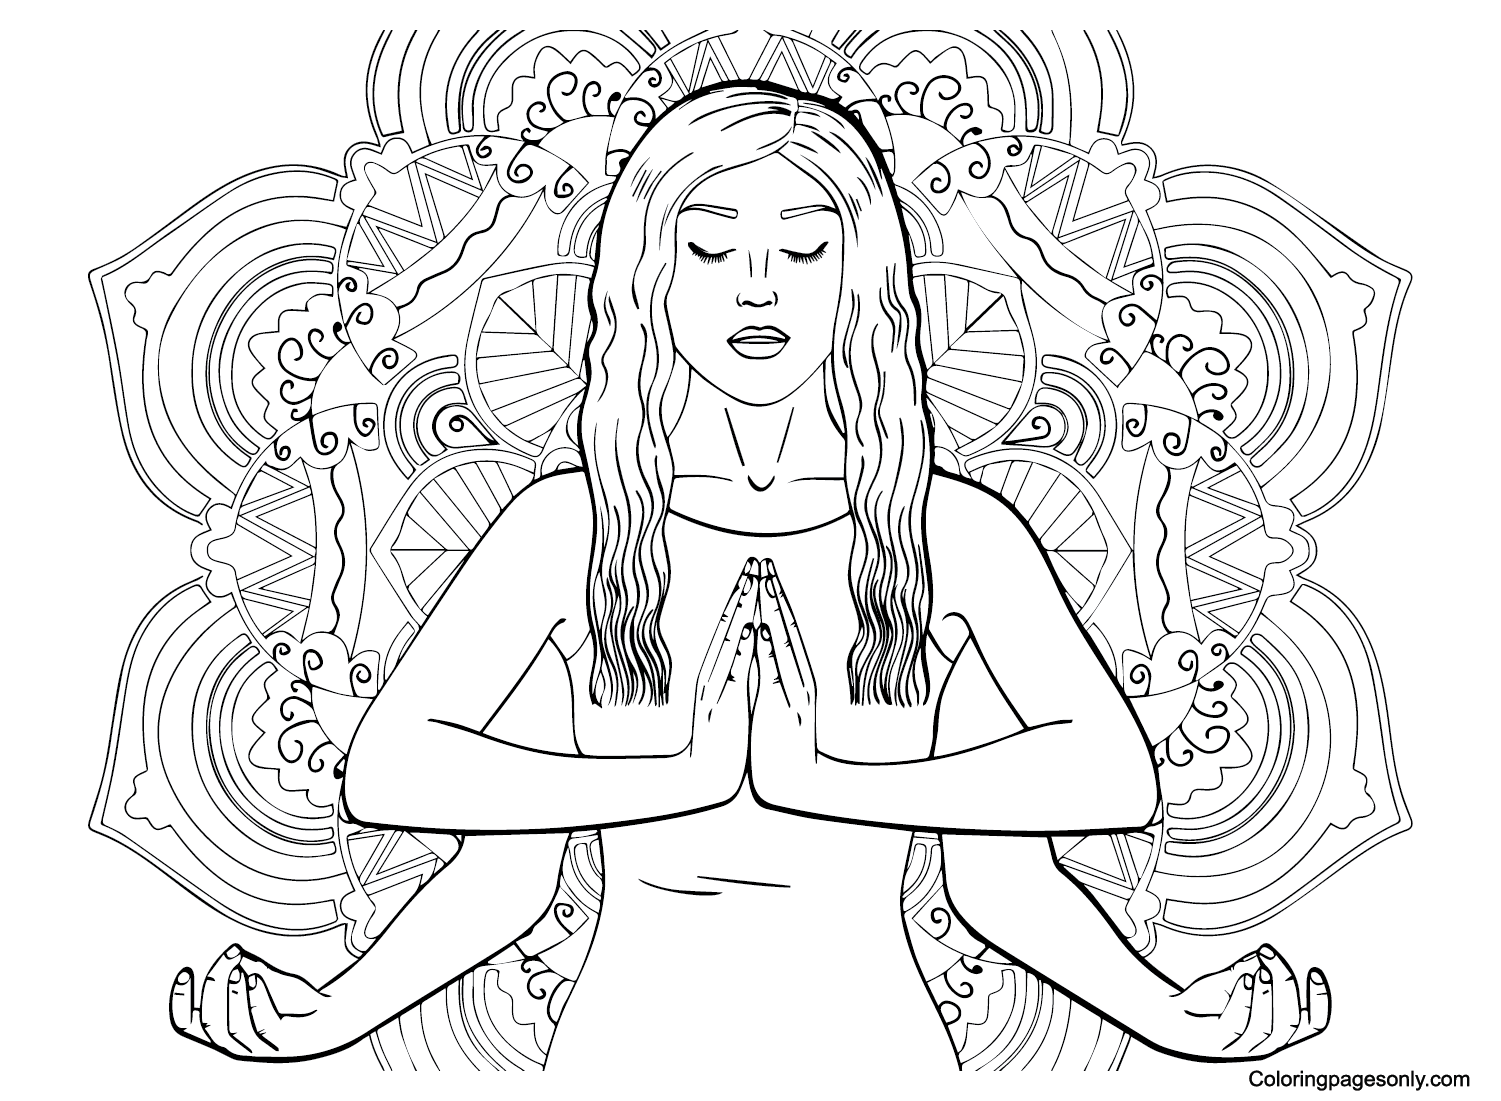 Mindfulness color Sheets Coloring Pages